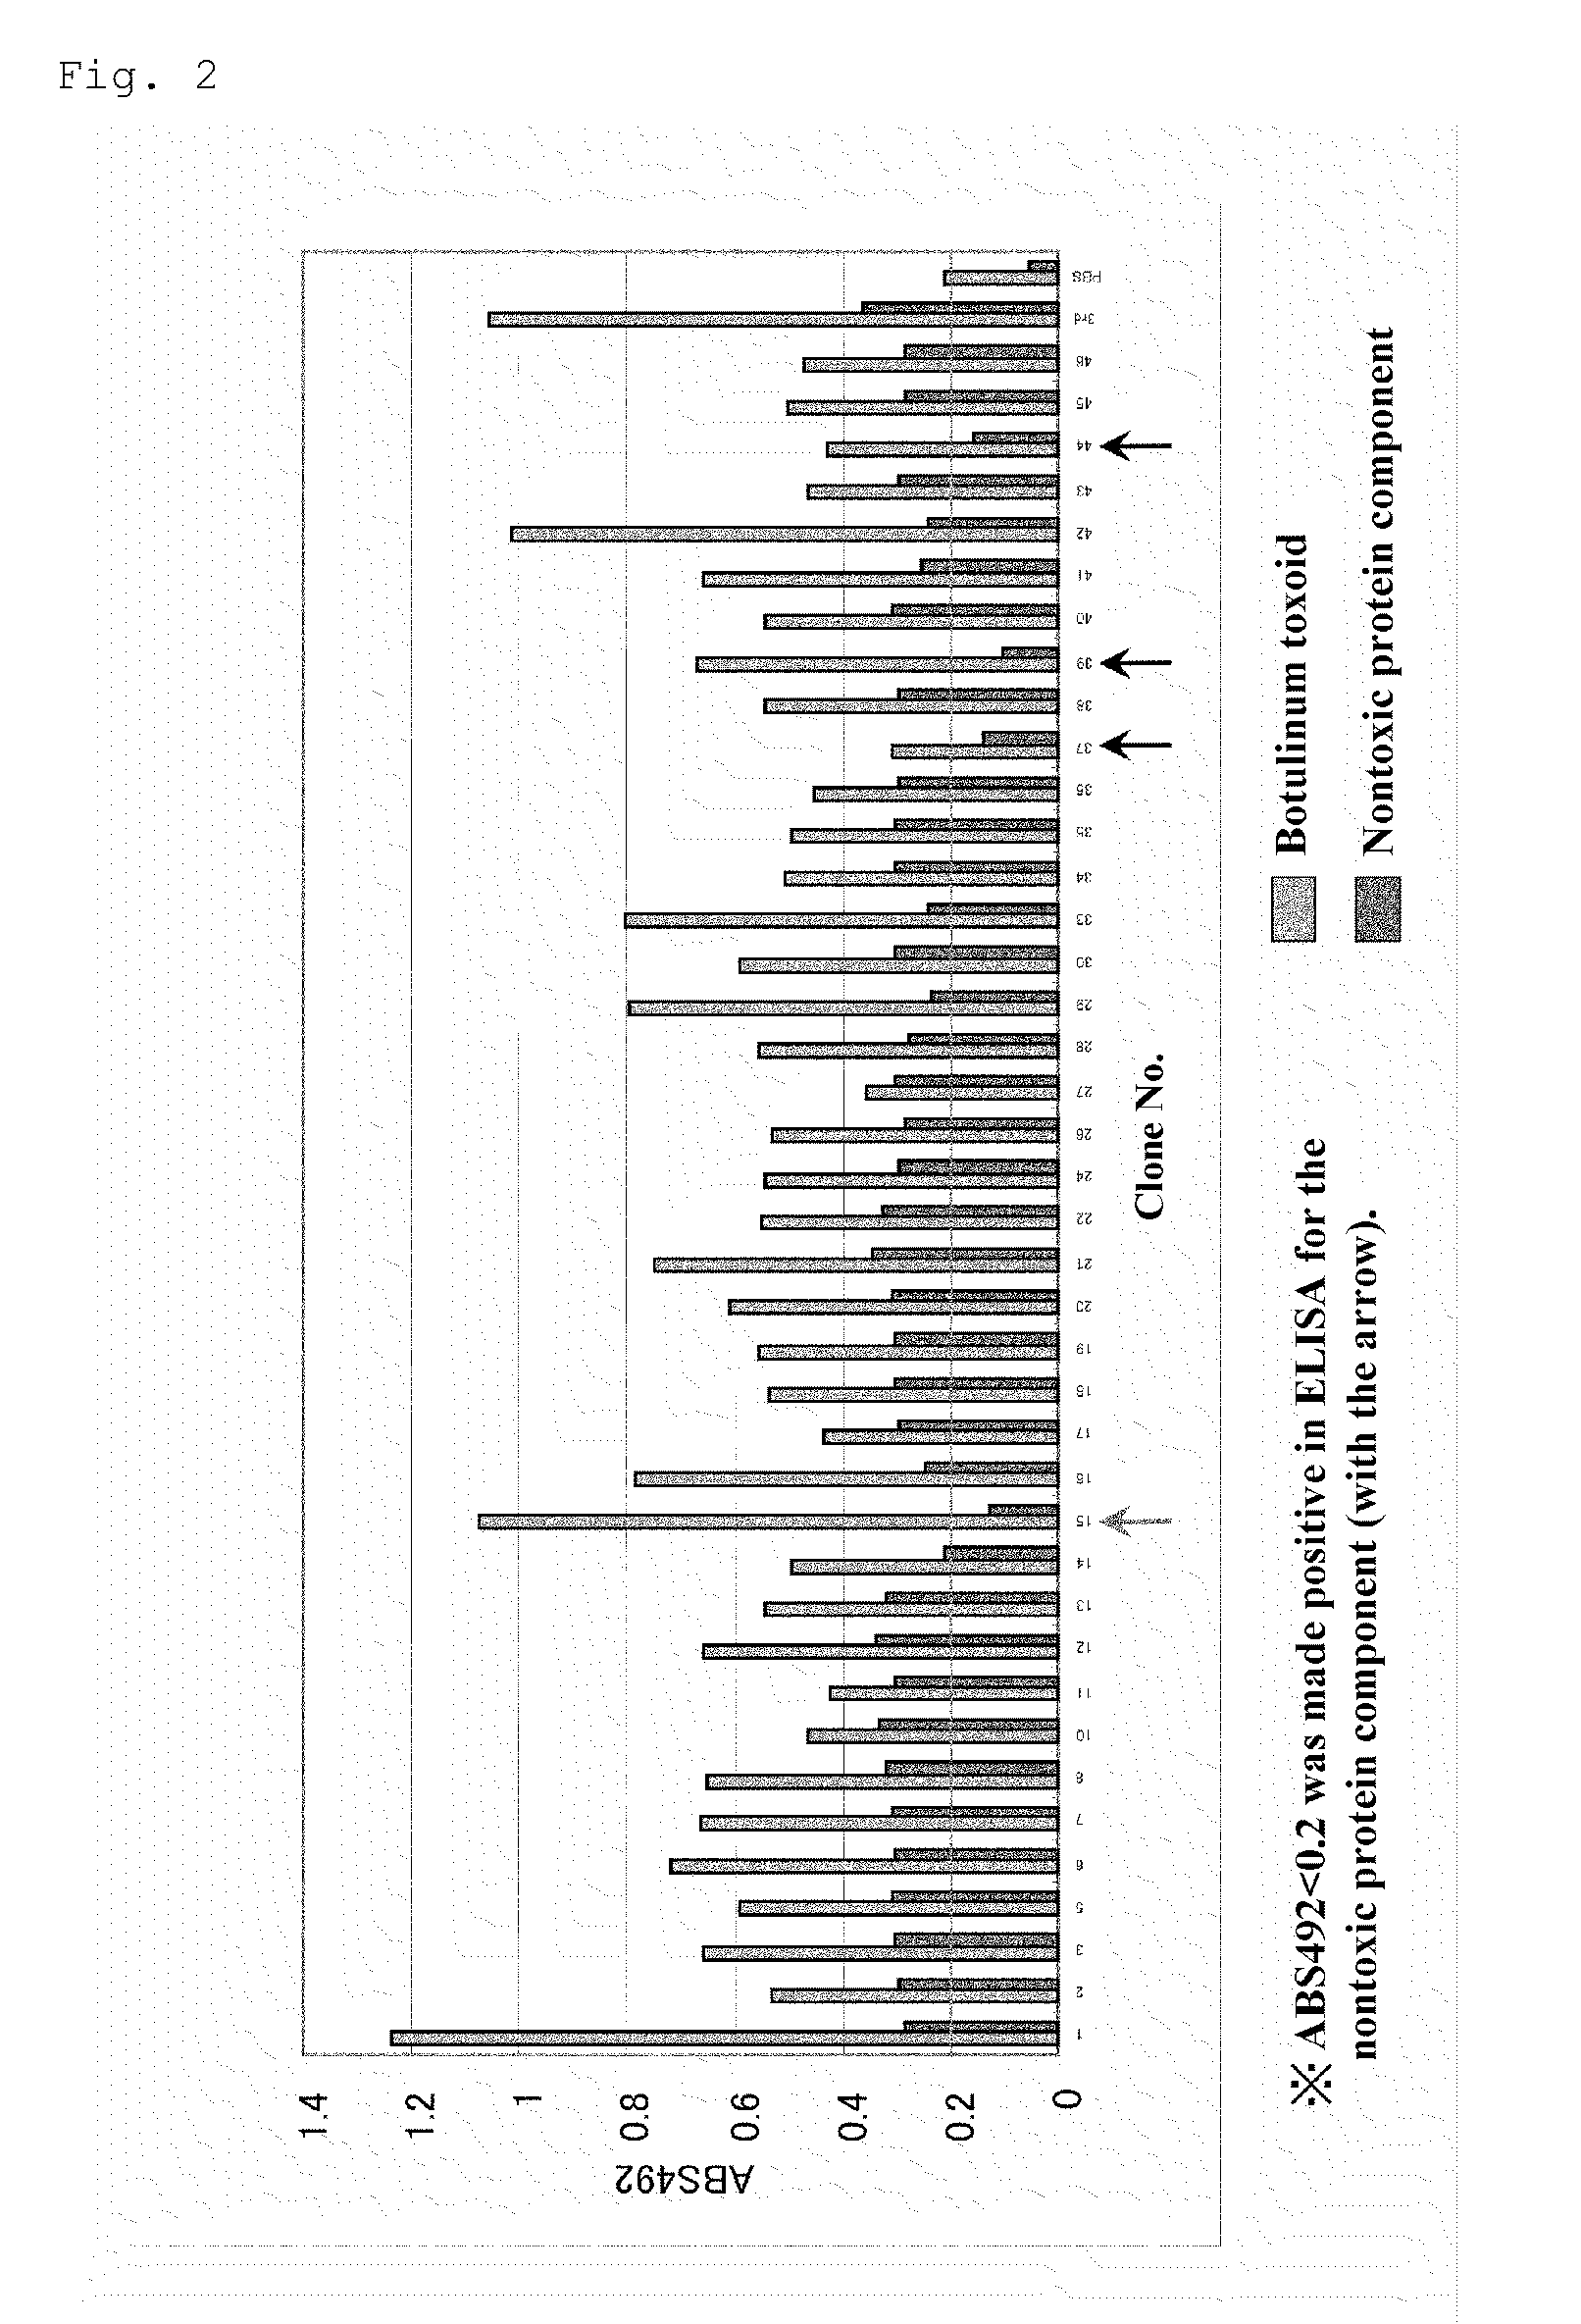 Composition for neutralizing botulinus toxin type-a, and human Anti-botulinus toxin type-a antibody